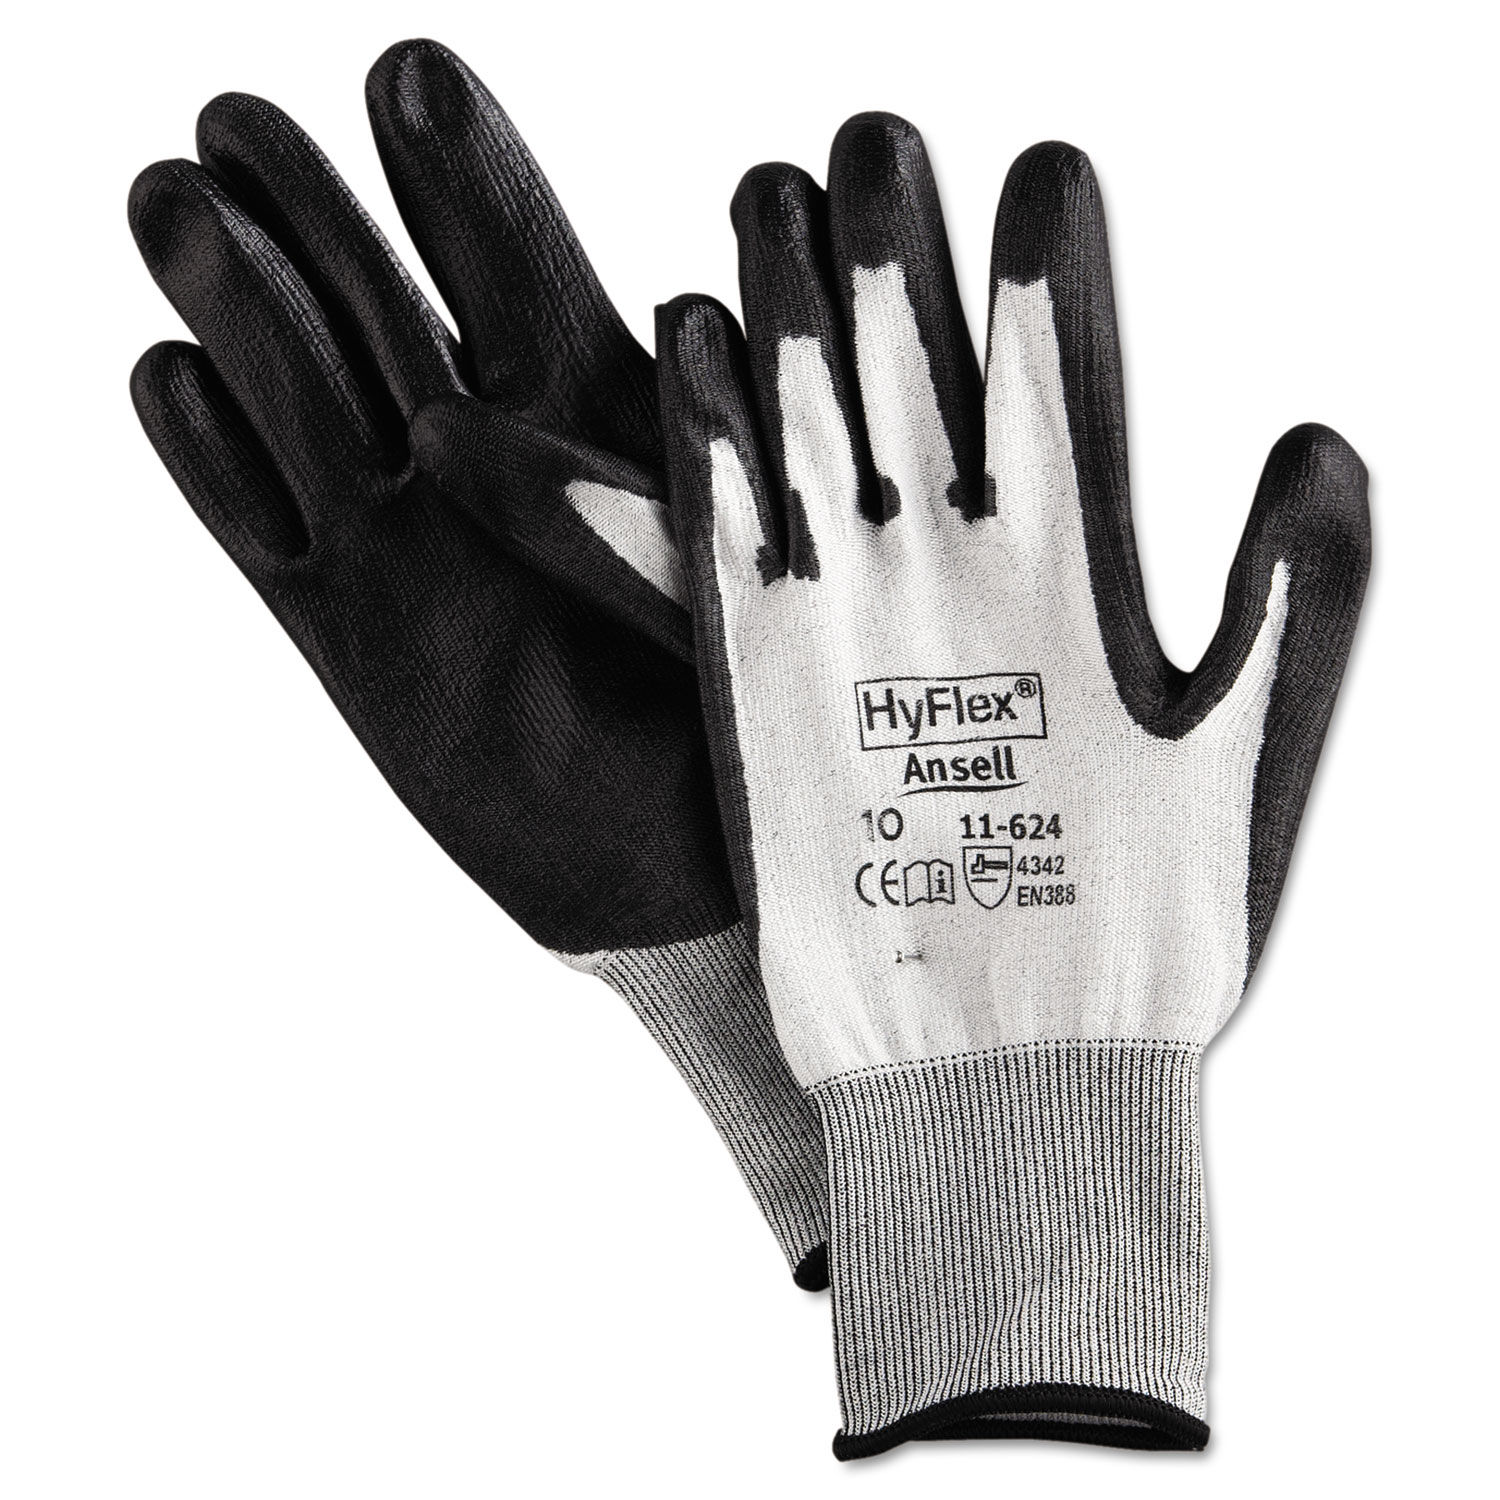 HyFlex Dyneema Cut-Protection Gloves Gray, Size 10, 12 Pairs